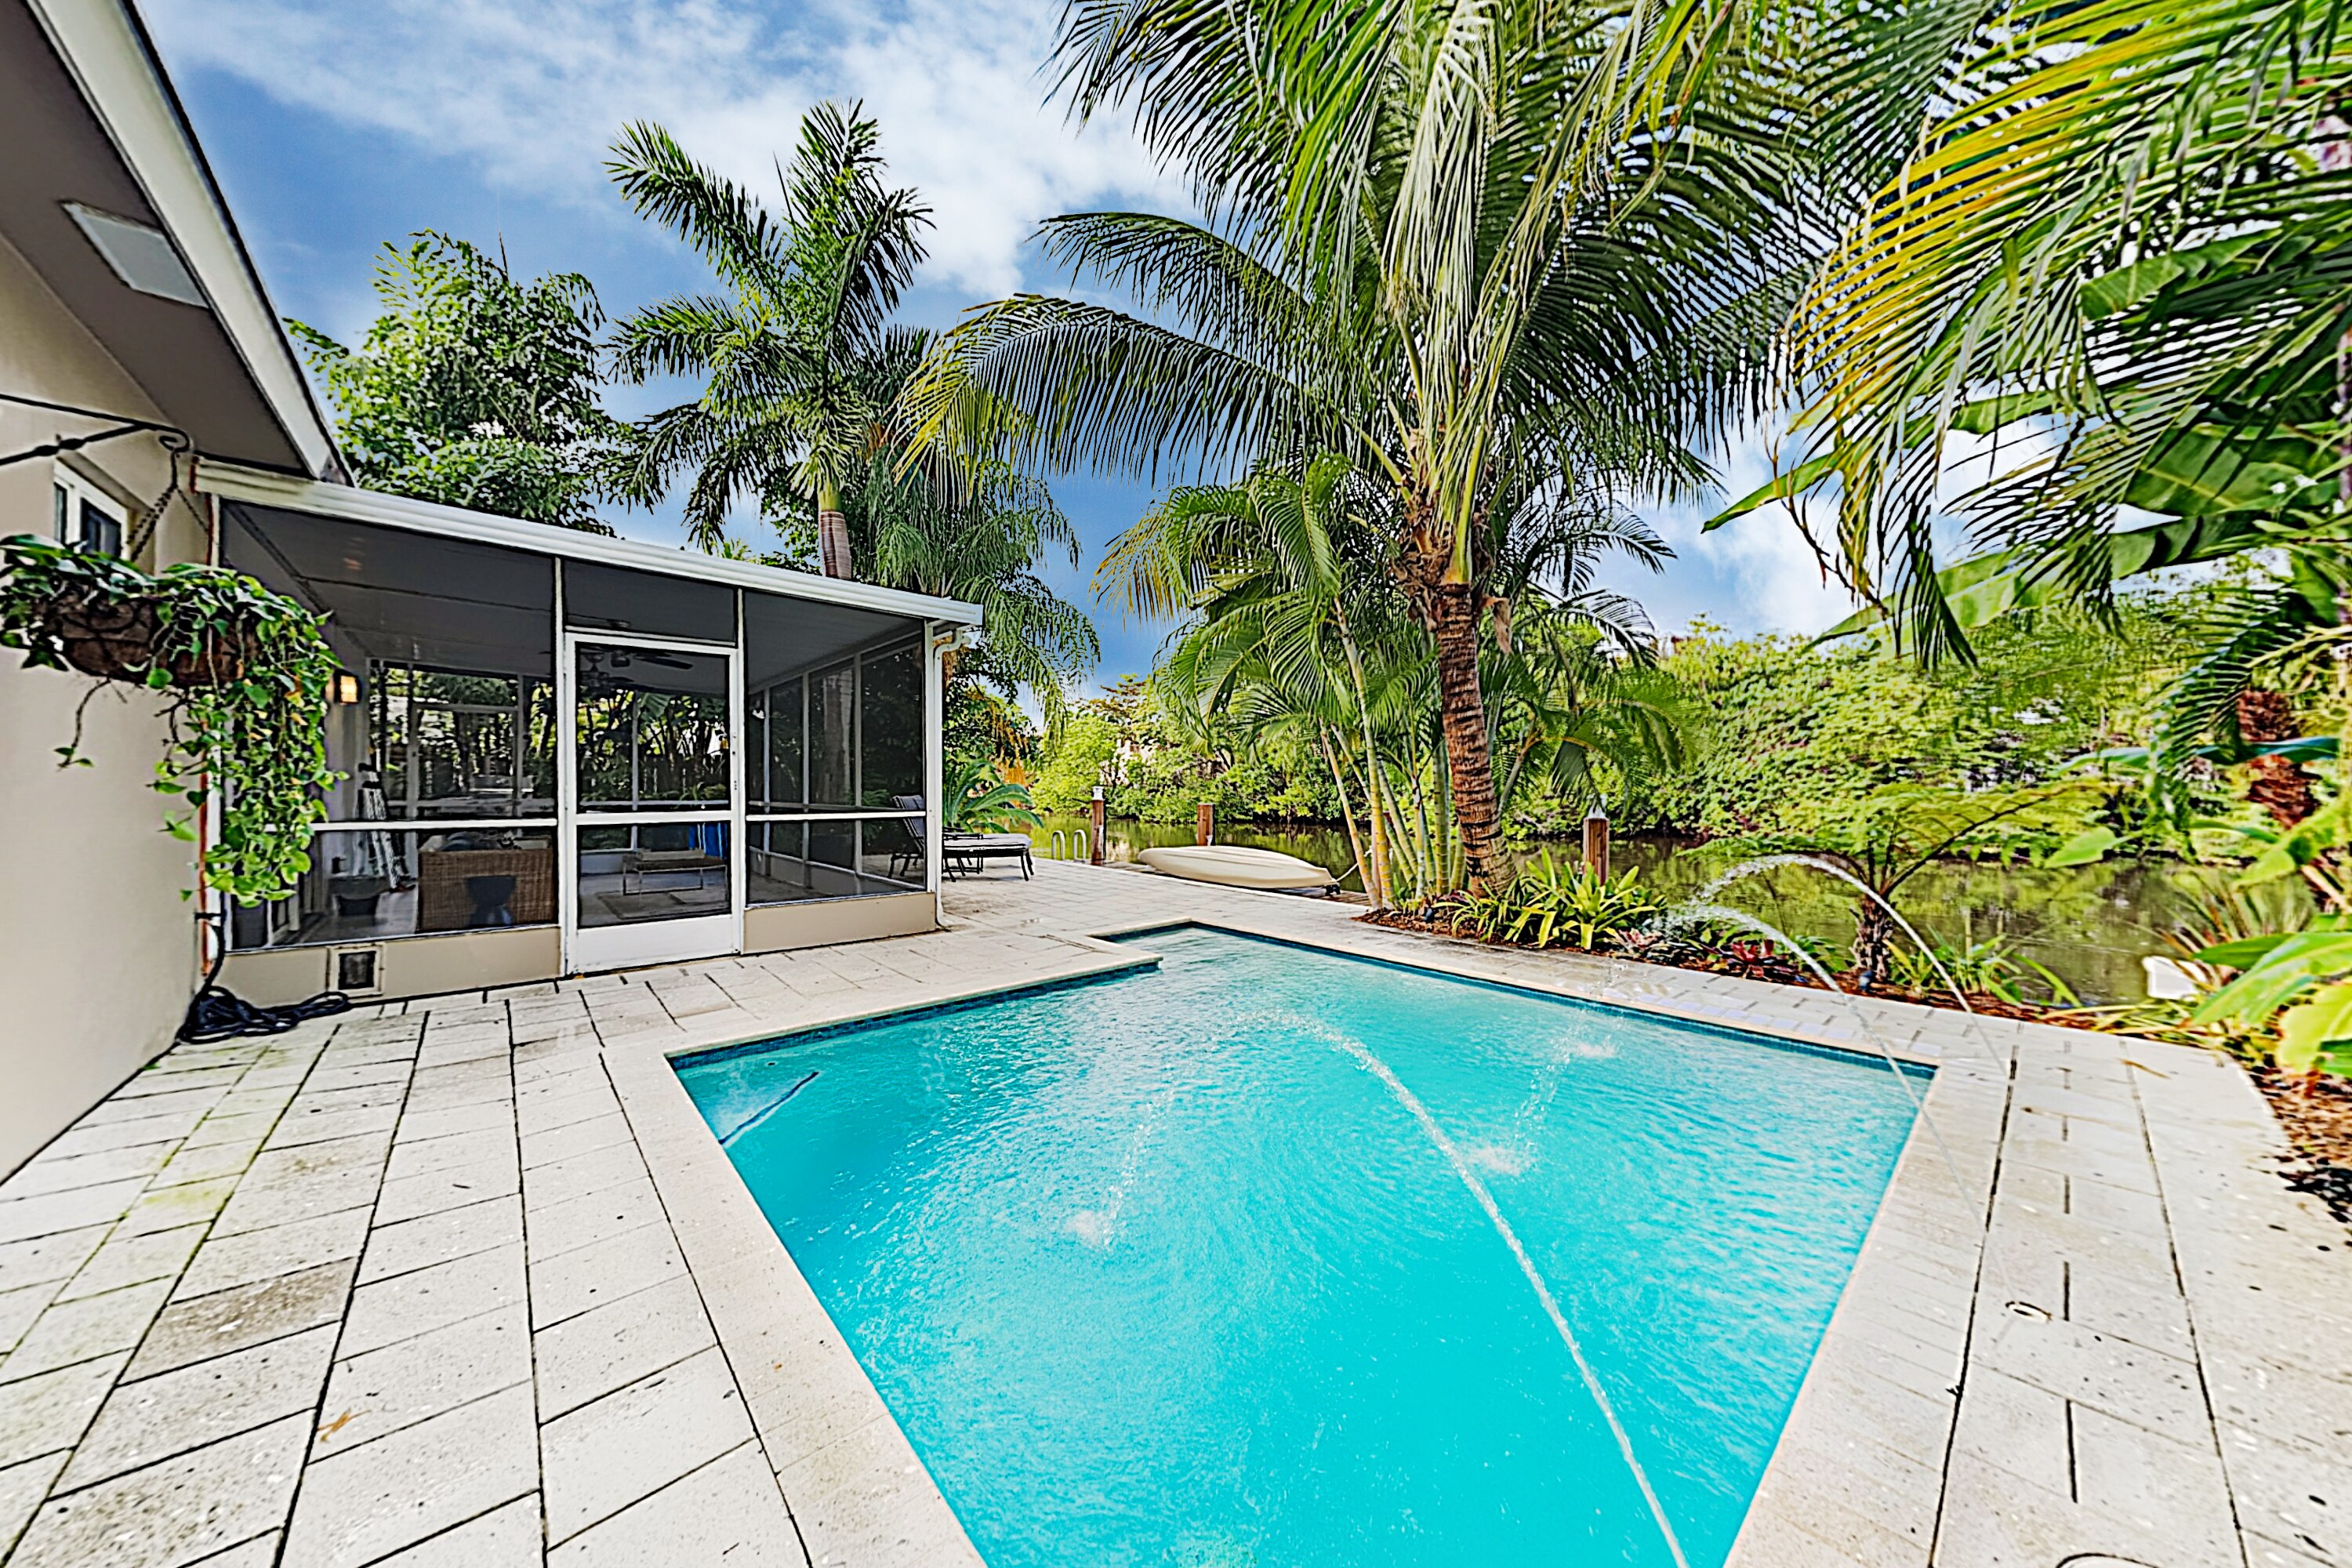 Welcome to Wilton Manors! This home is professionally managed by TurnKey Vacation Rentals.